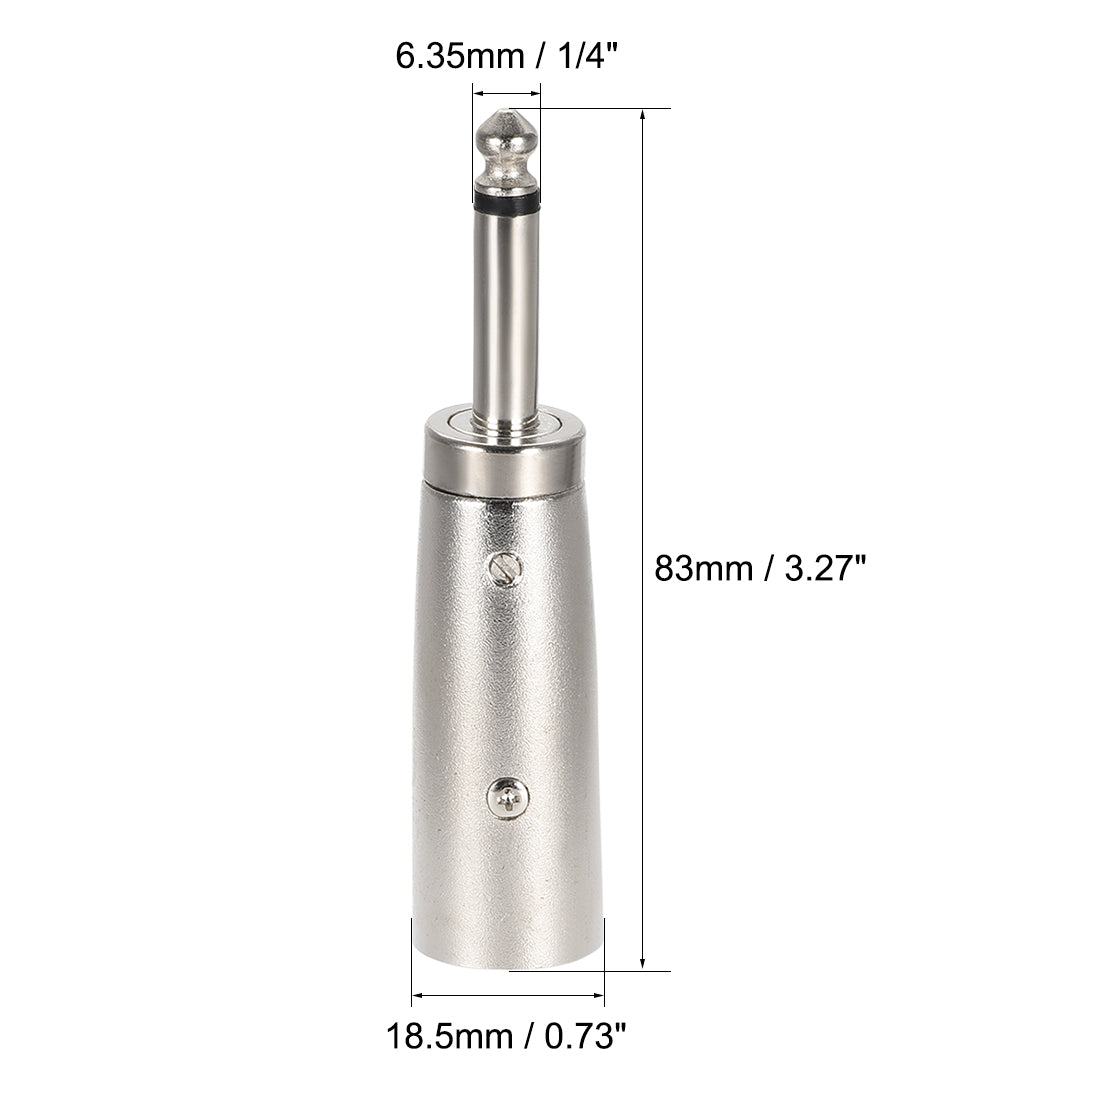 uxcell Uxcell XLR Male to 1/4" Male TRS Adapter,Gender Changer - XLR-M to 6.35mm Mono Coupler	Adapters,Microphones Mono Plug In Audio Connector,Mic Plug,Single